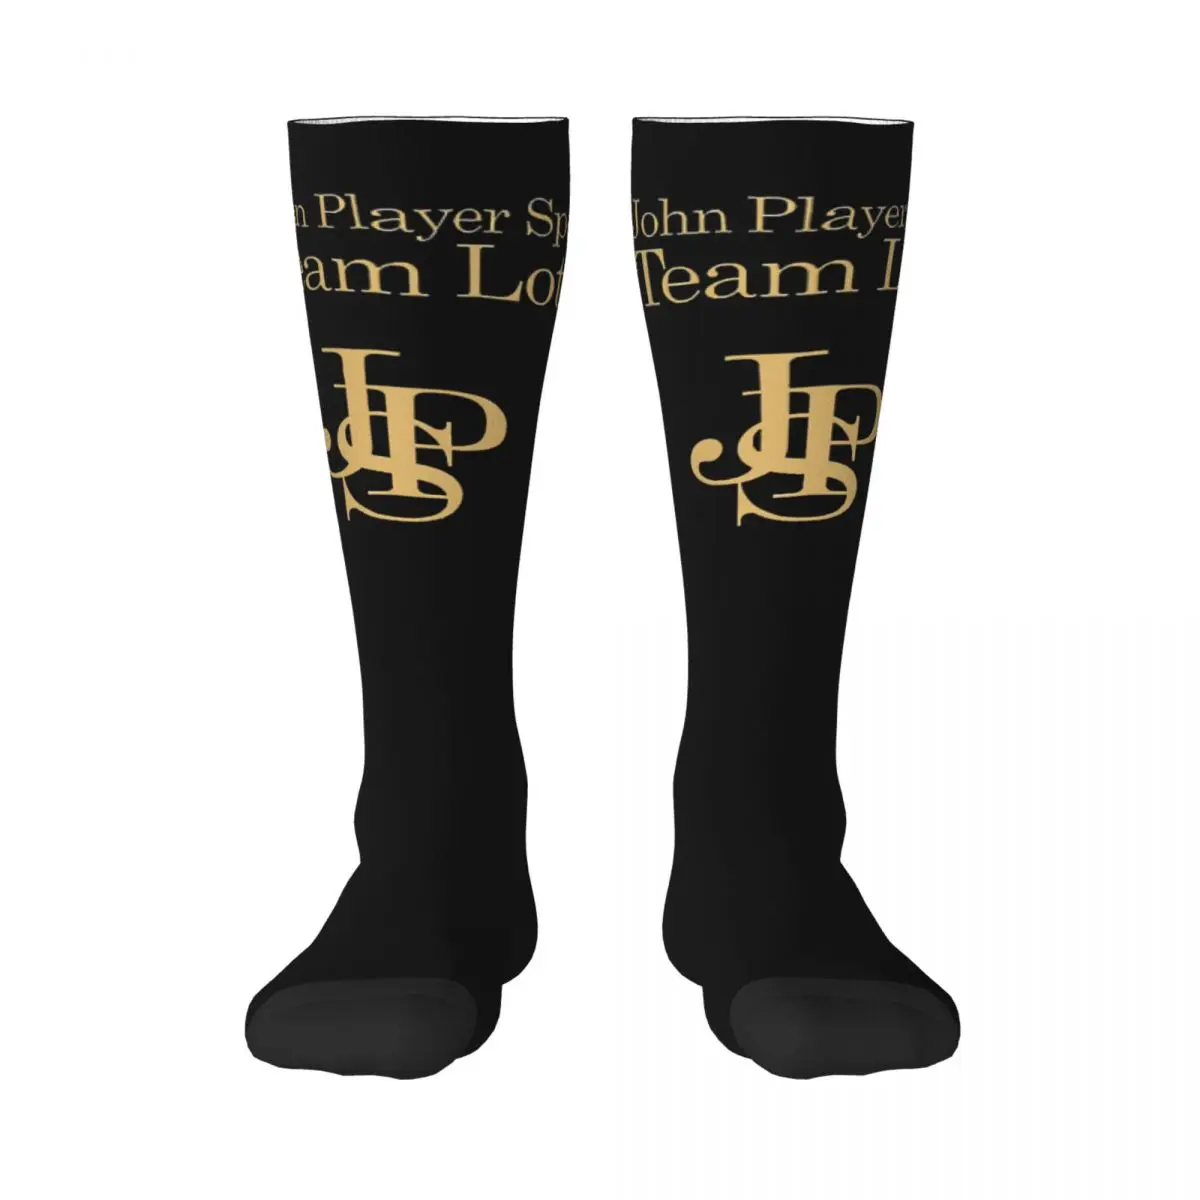 

Classic Best Seller JPS John Player 4 Adult Stockings Good breathability Cute style Elastic Stockings Humor Graphic